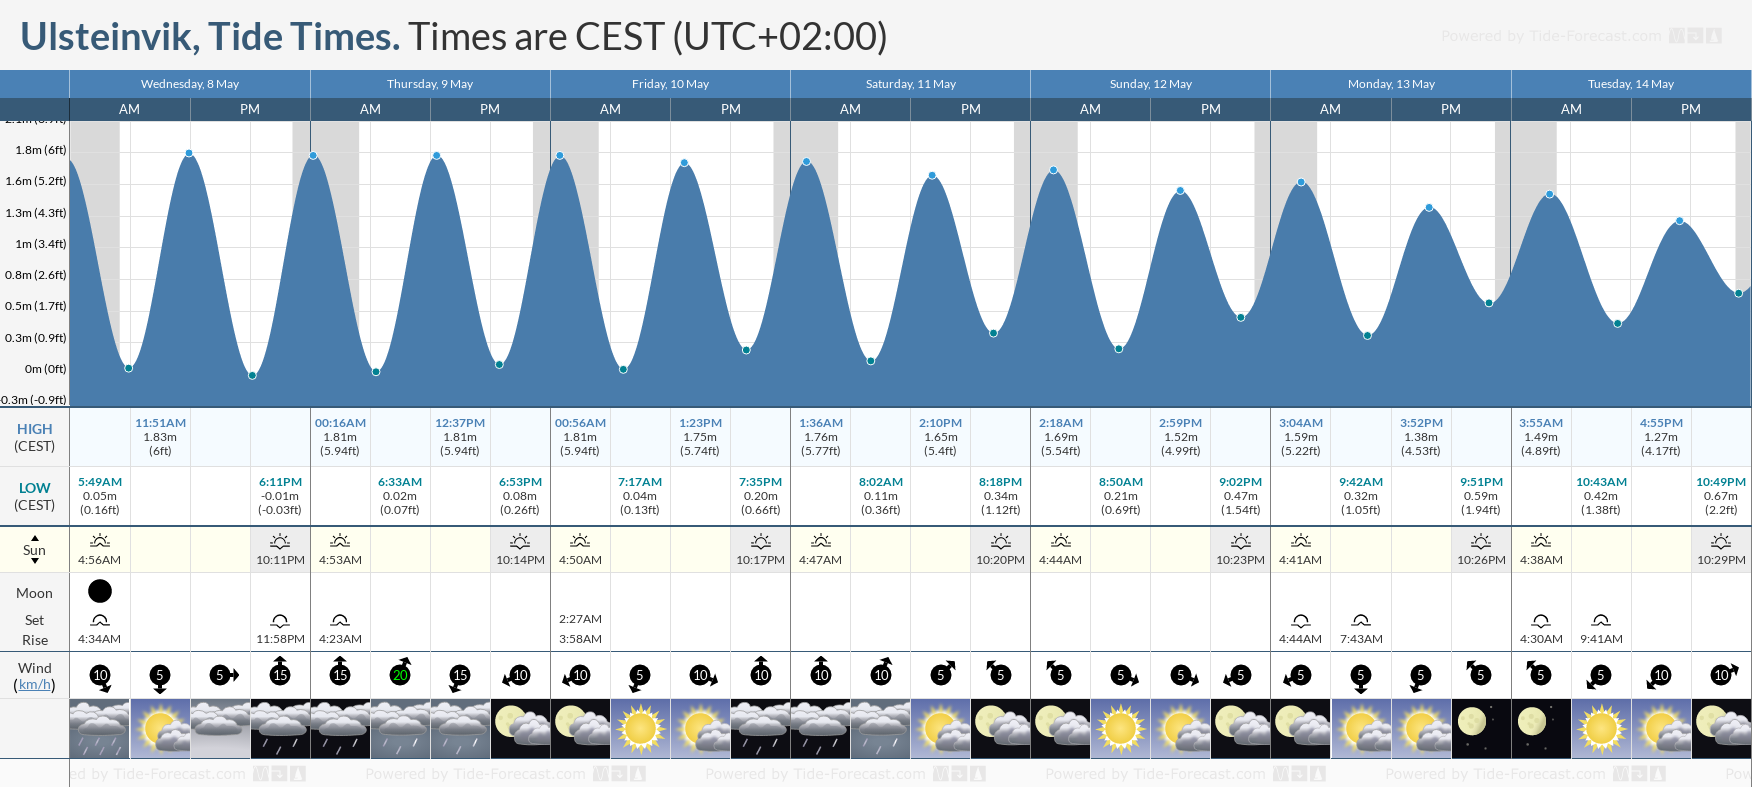 Ulsteinvik Tide Chart including high and low tide tide times for the next 7 days